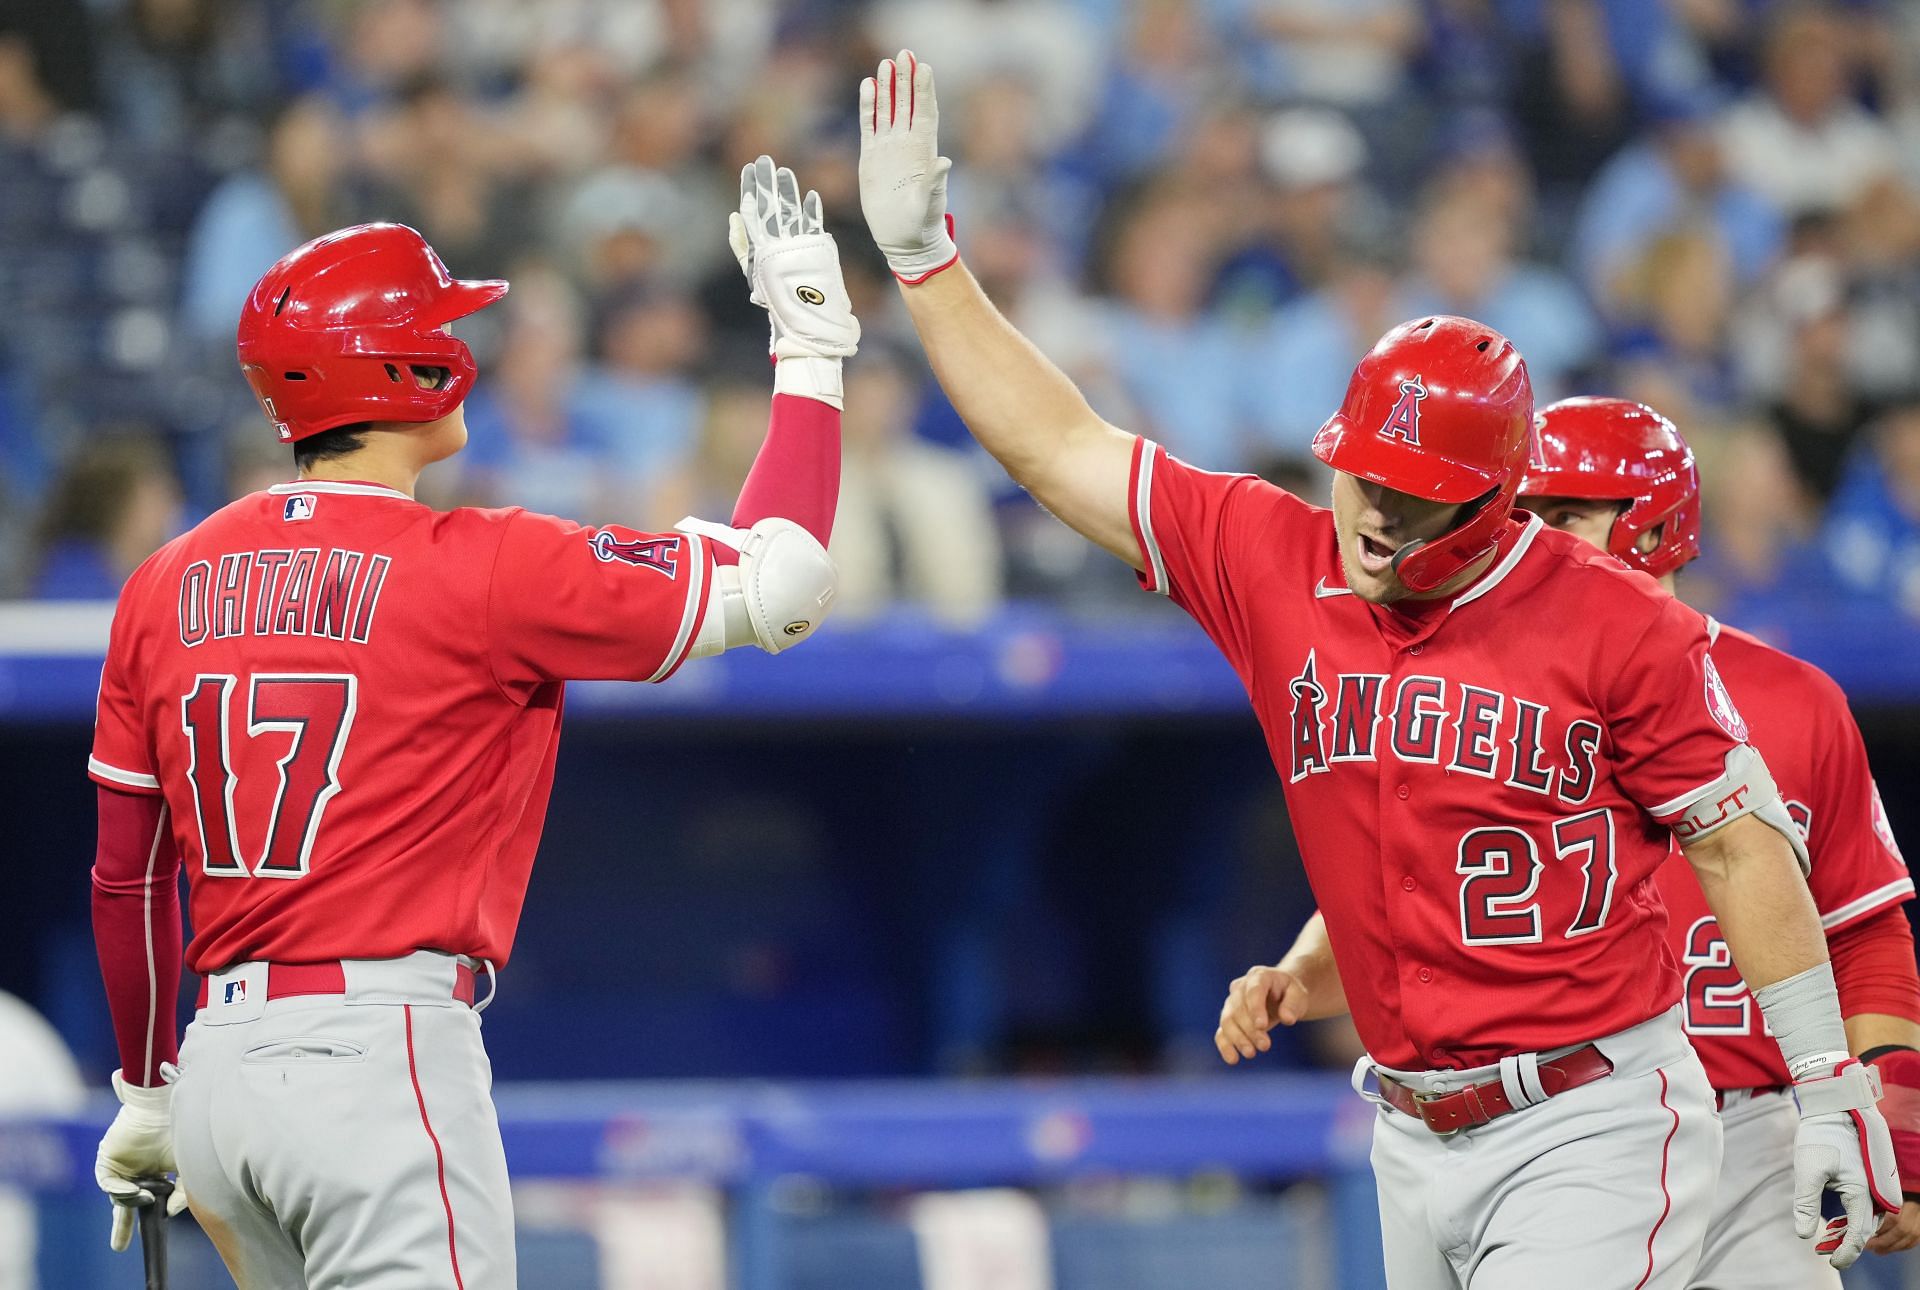 It's Mike Trout vs. Shohei Ohtani in the World Baseball Classic